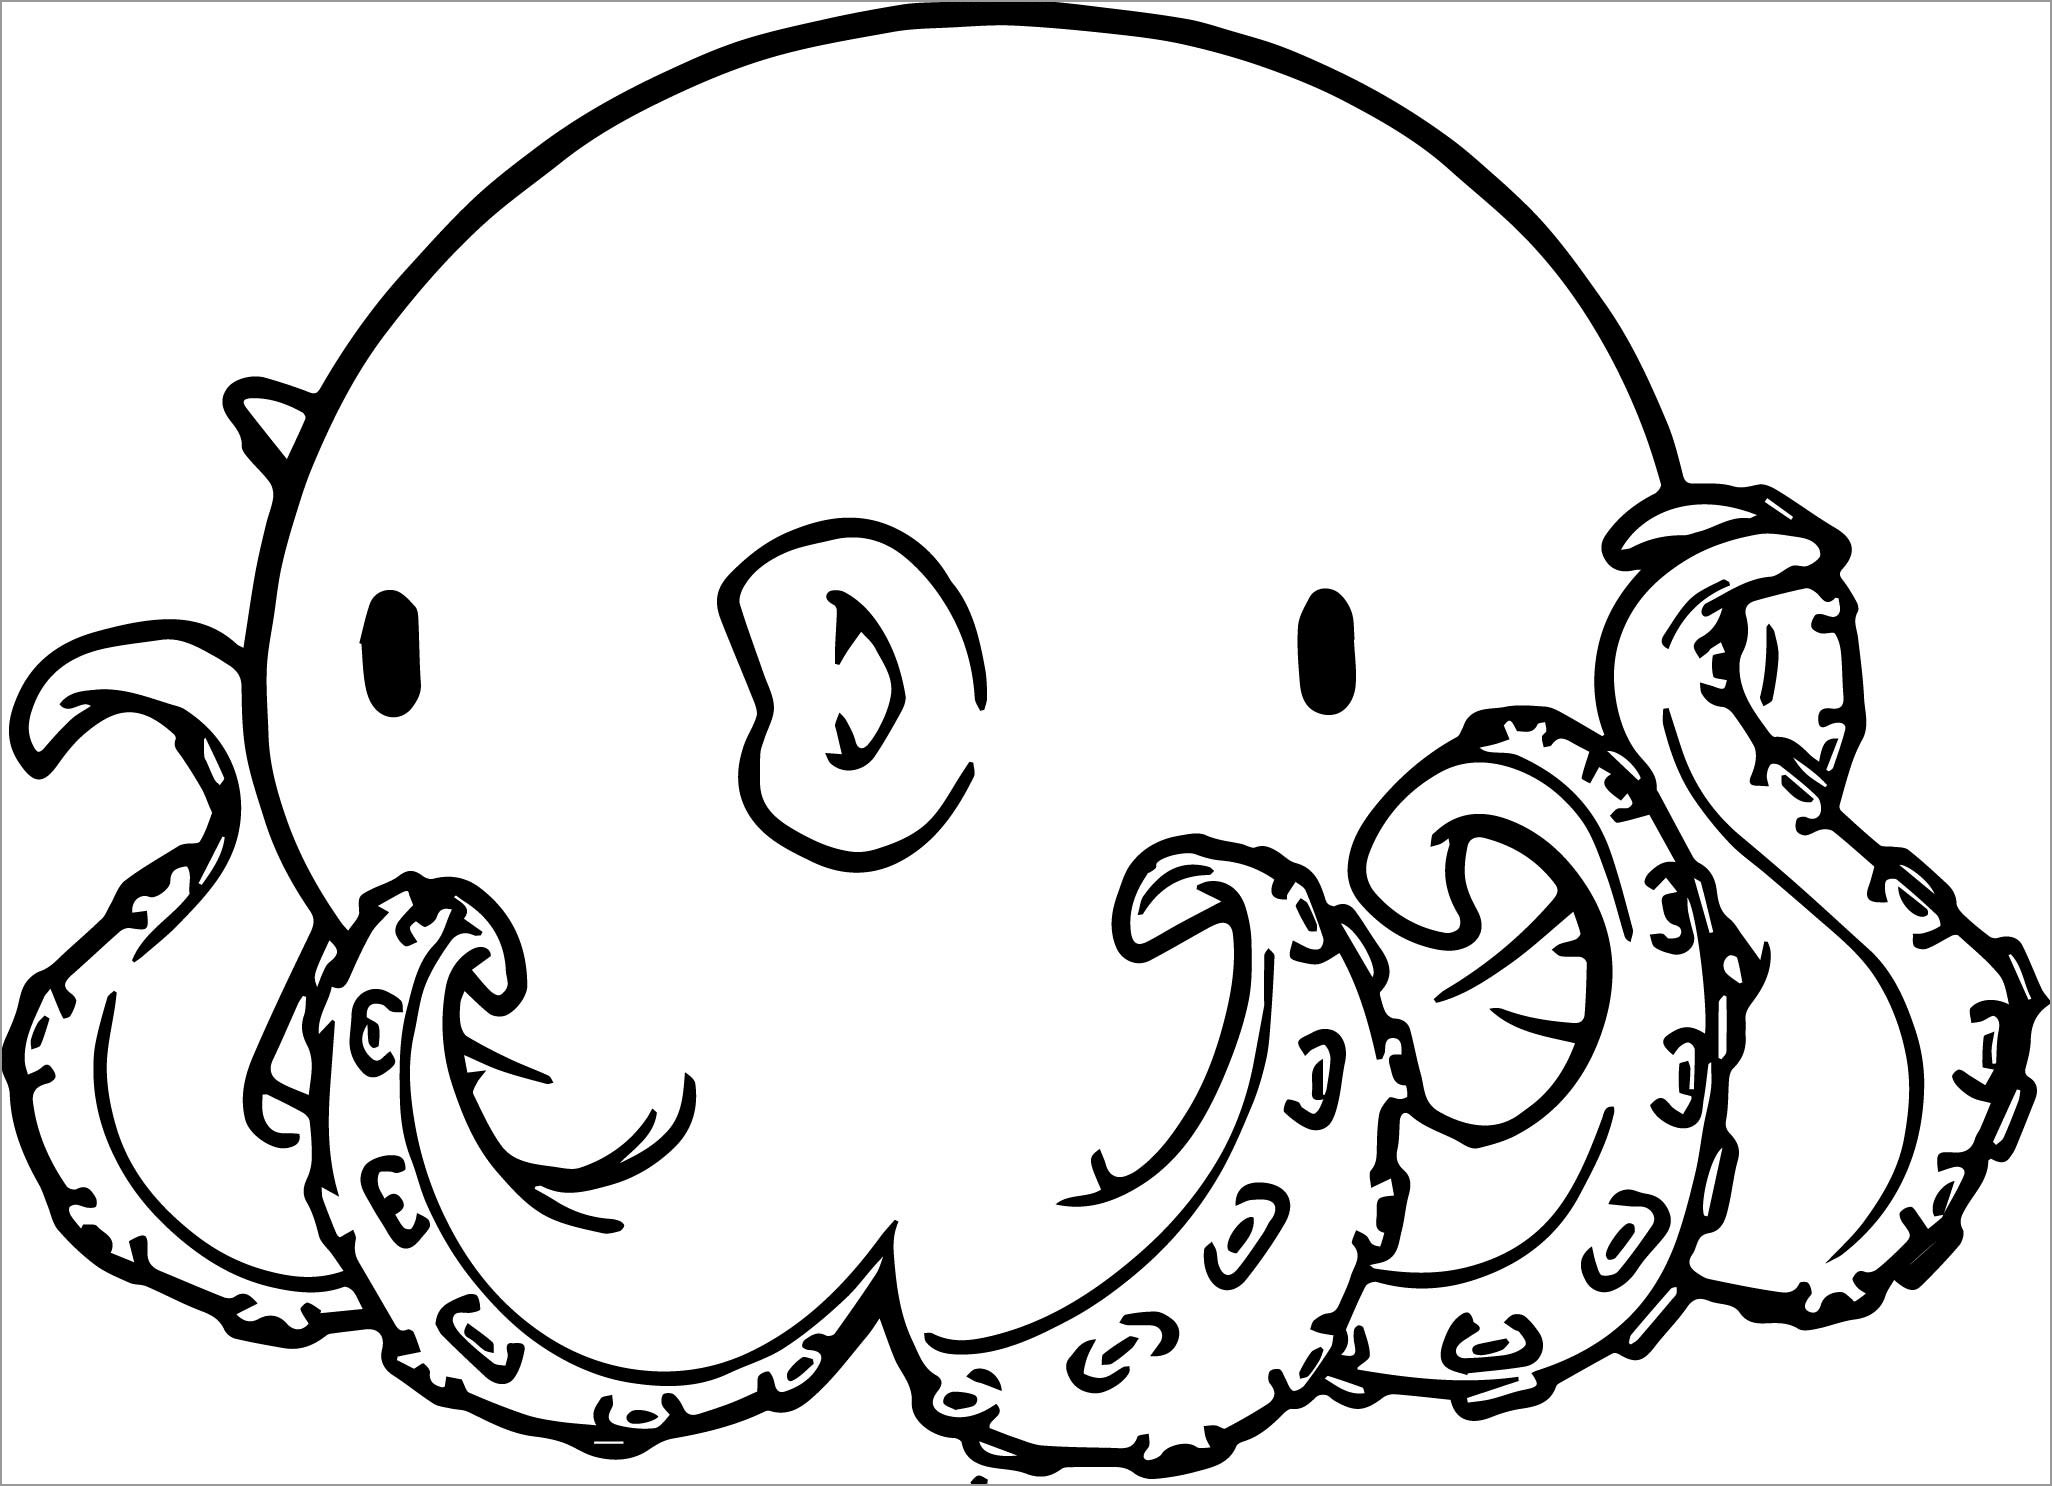 Octopus Coloring Pages - ColoringBay